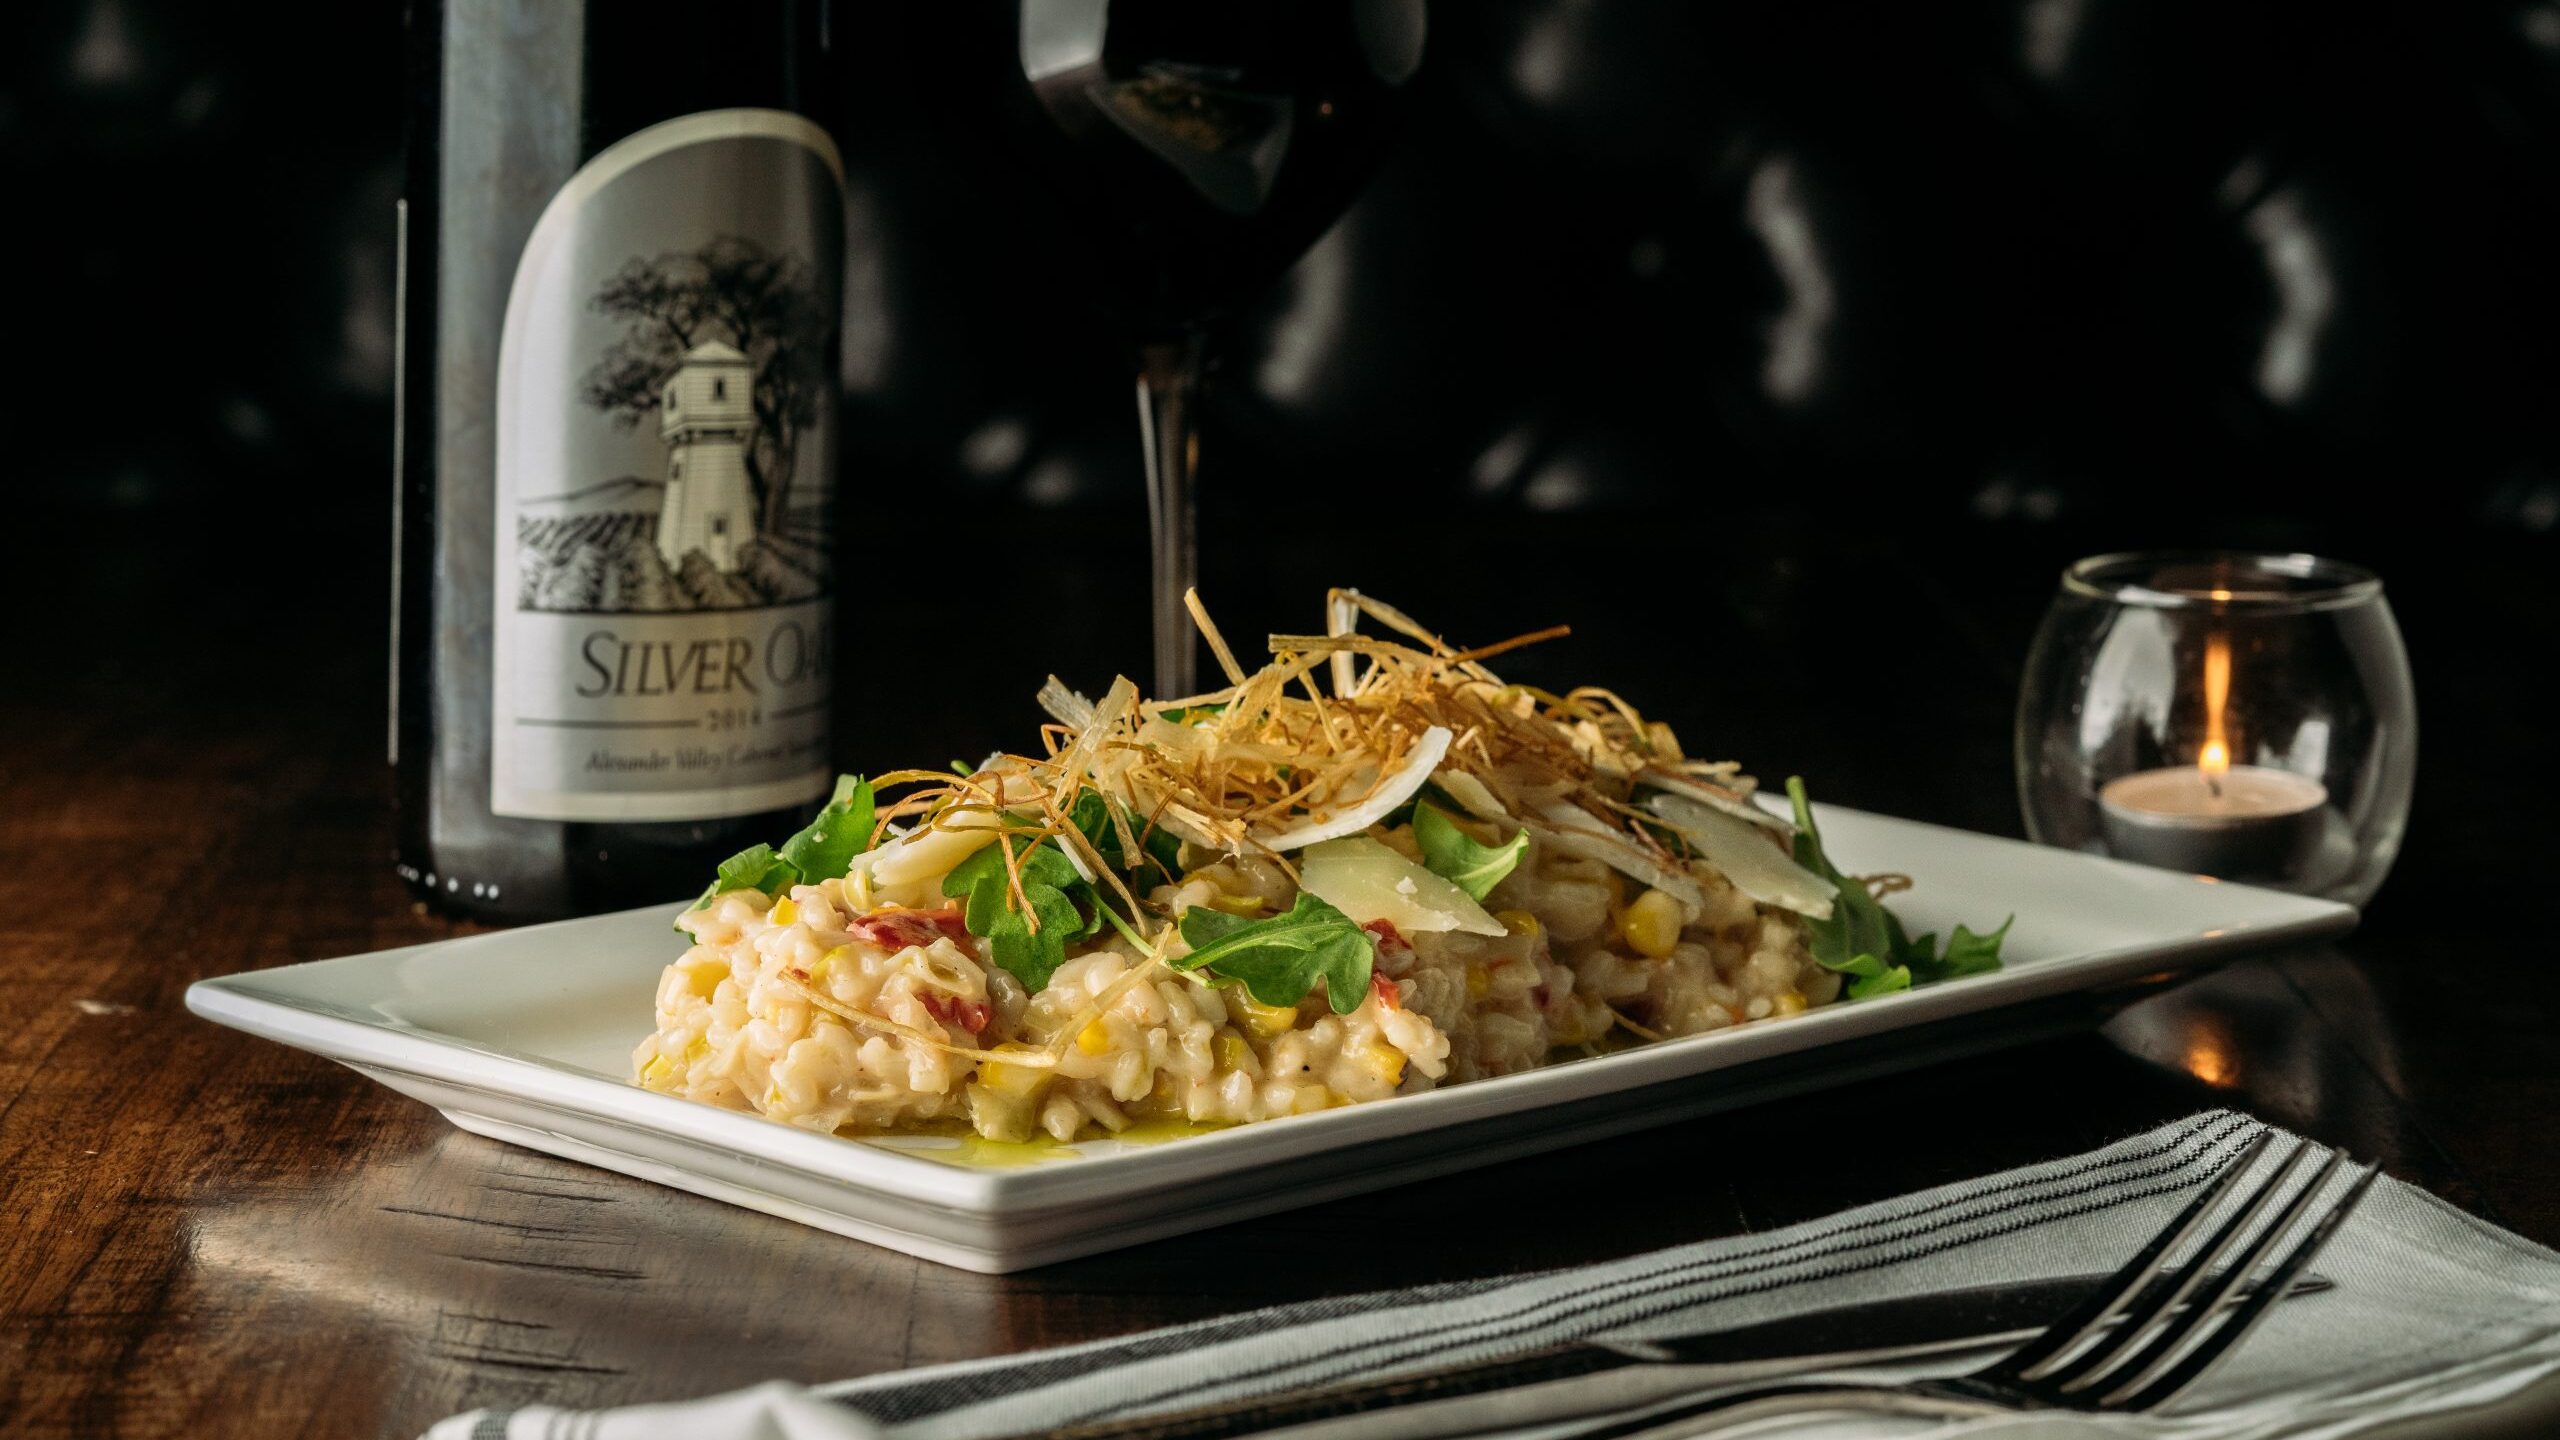 A plate of charred corn risotto with a glass of wine from The Cellar at Duckworth's in uptown Charlotte.